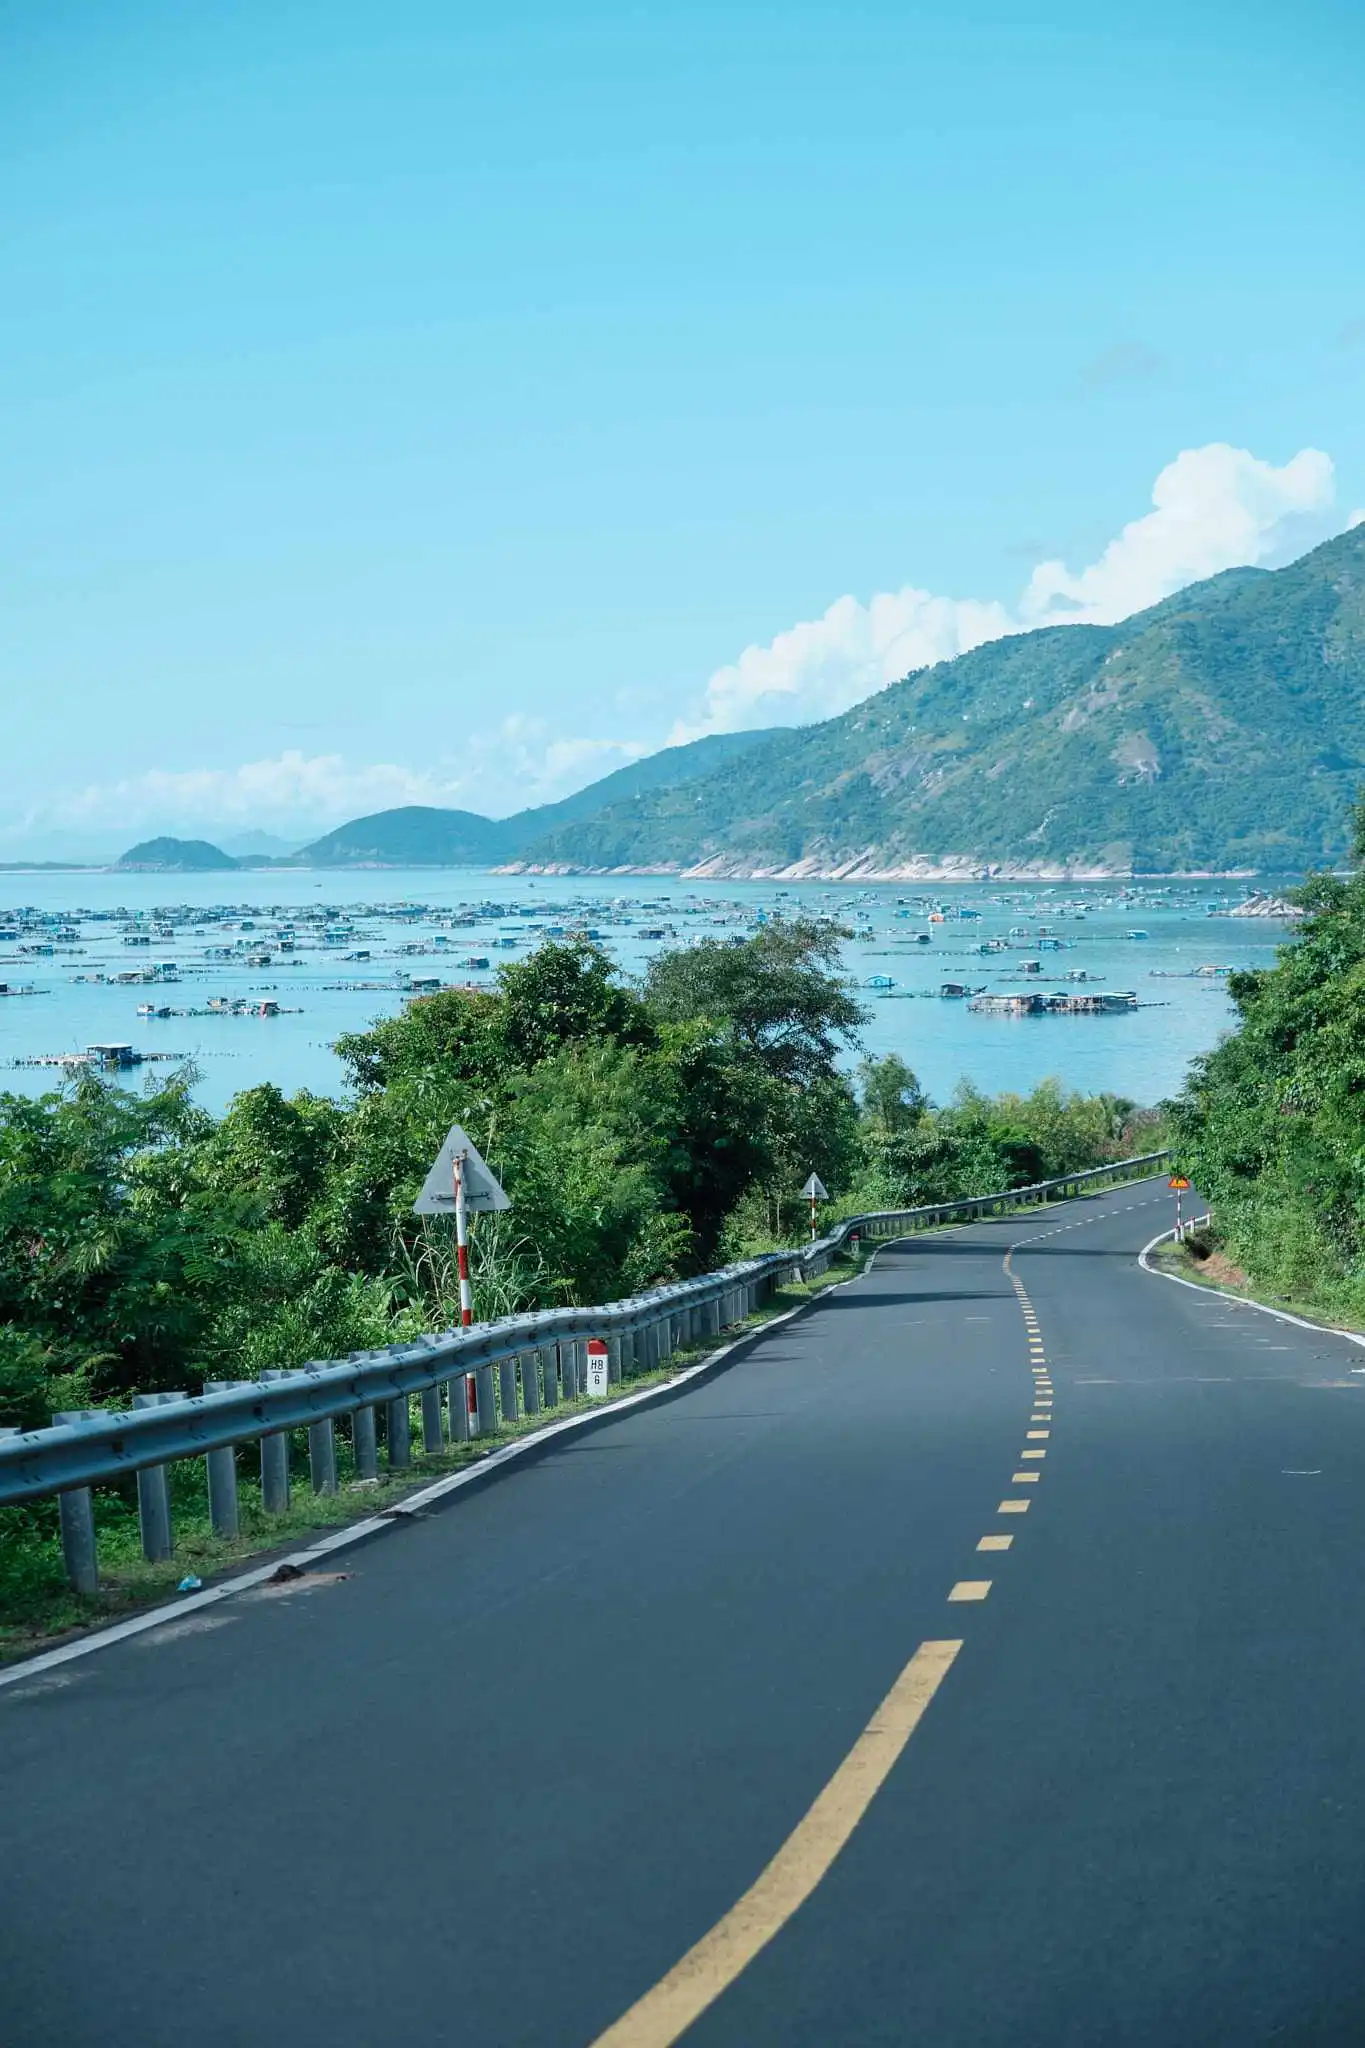 Canh Vinh Ro is famous for being a beautiful bay intertwined between the majesty of the hills and mountains and the poetry of the sea hugging along the S-shaped curve.